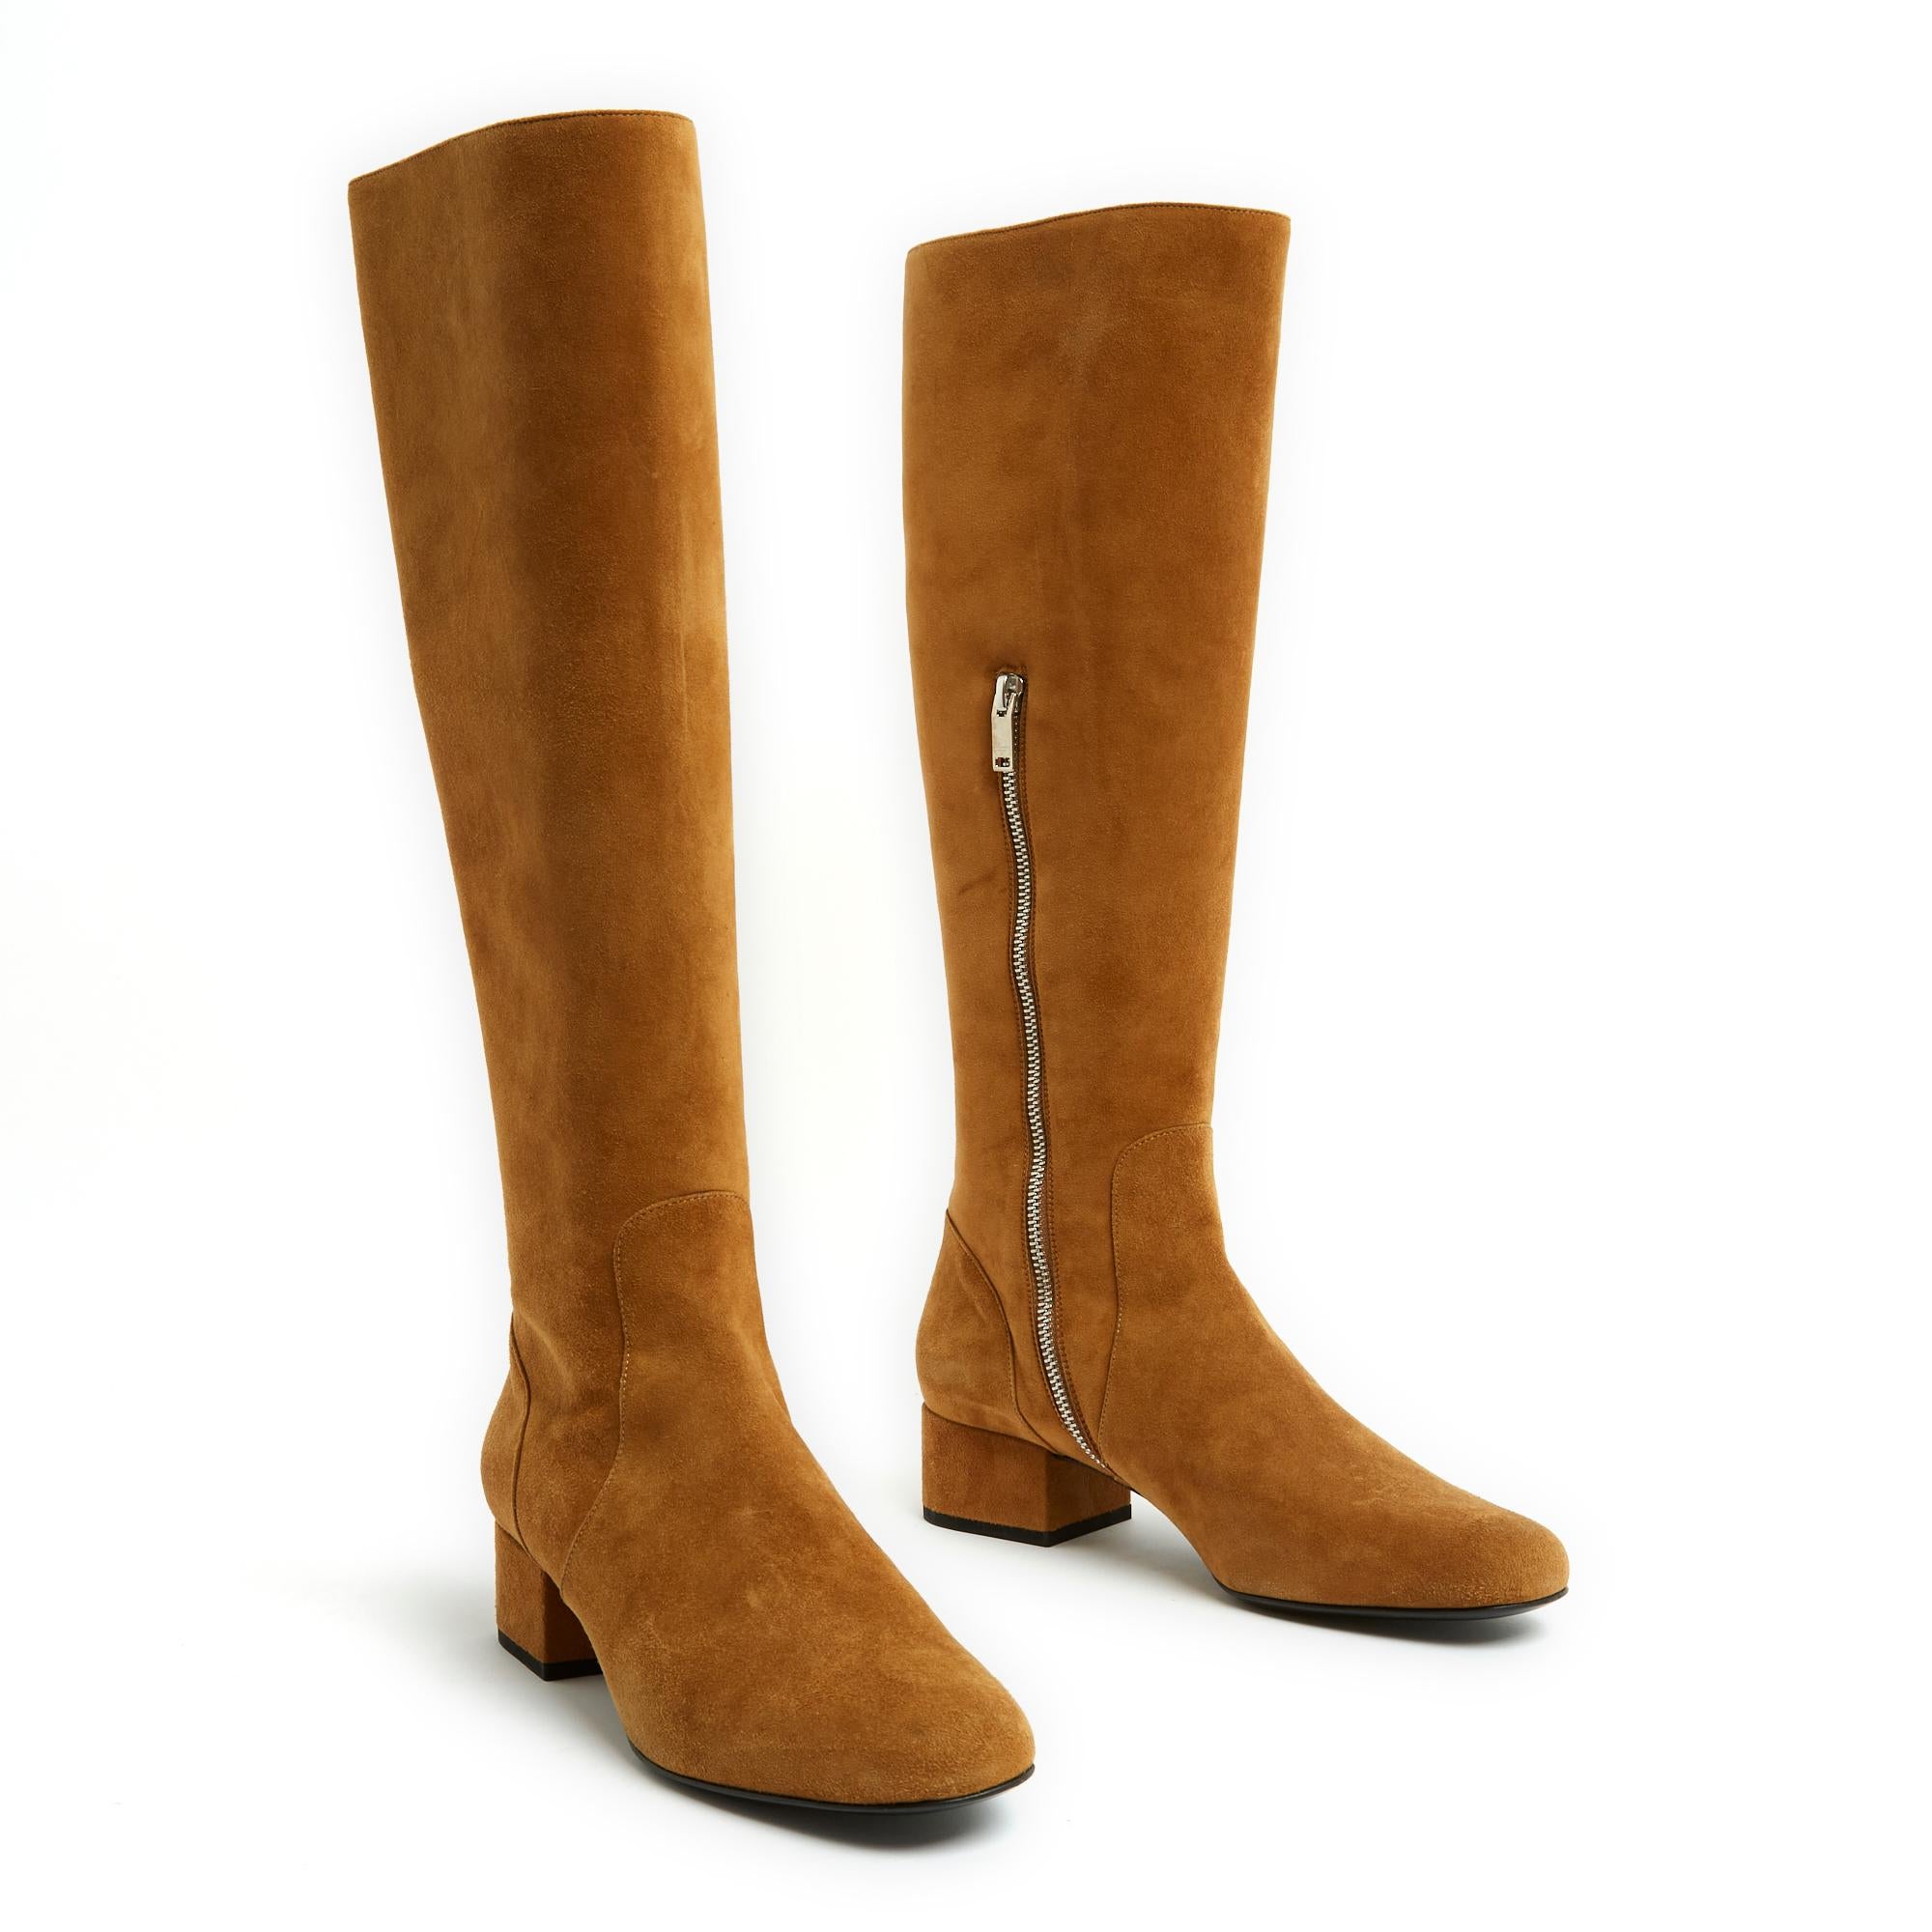 Saint Laurent boots in camel-colored suede, small heel, almond toe, zip opening on the inside of the ankle. Size EU38.5, heel 4.5 cm, insole cm, shaft (from heel) 40 cm, calf width 18 cm, boot top width 18 cm. The boots are perfectly new,